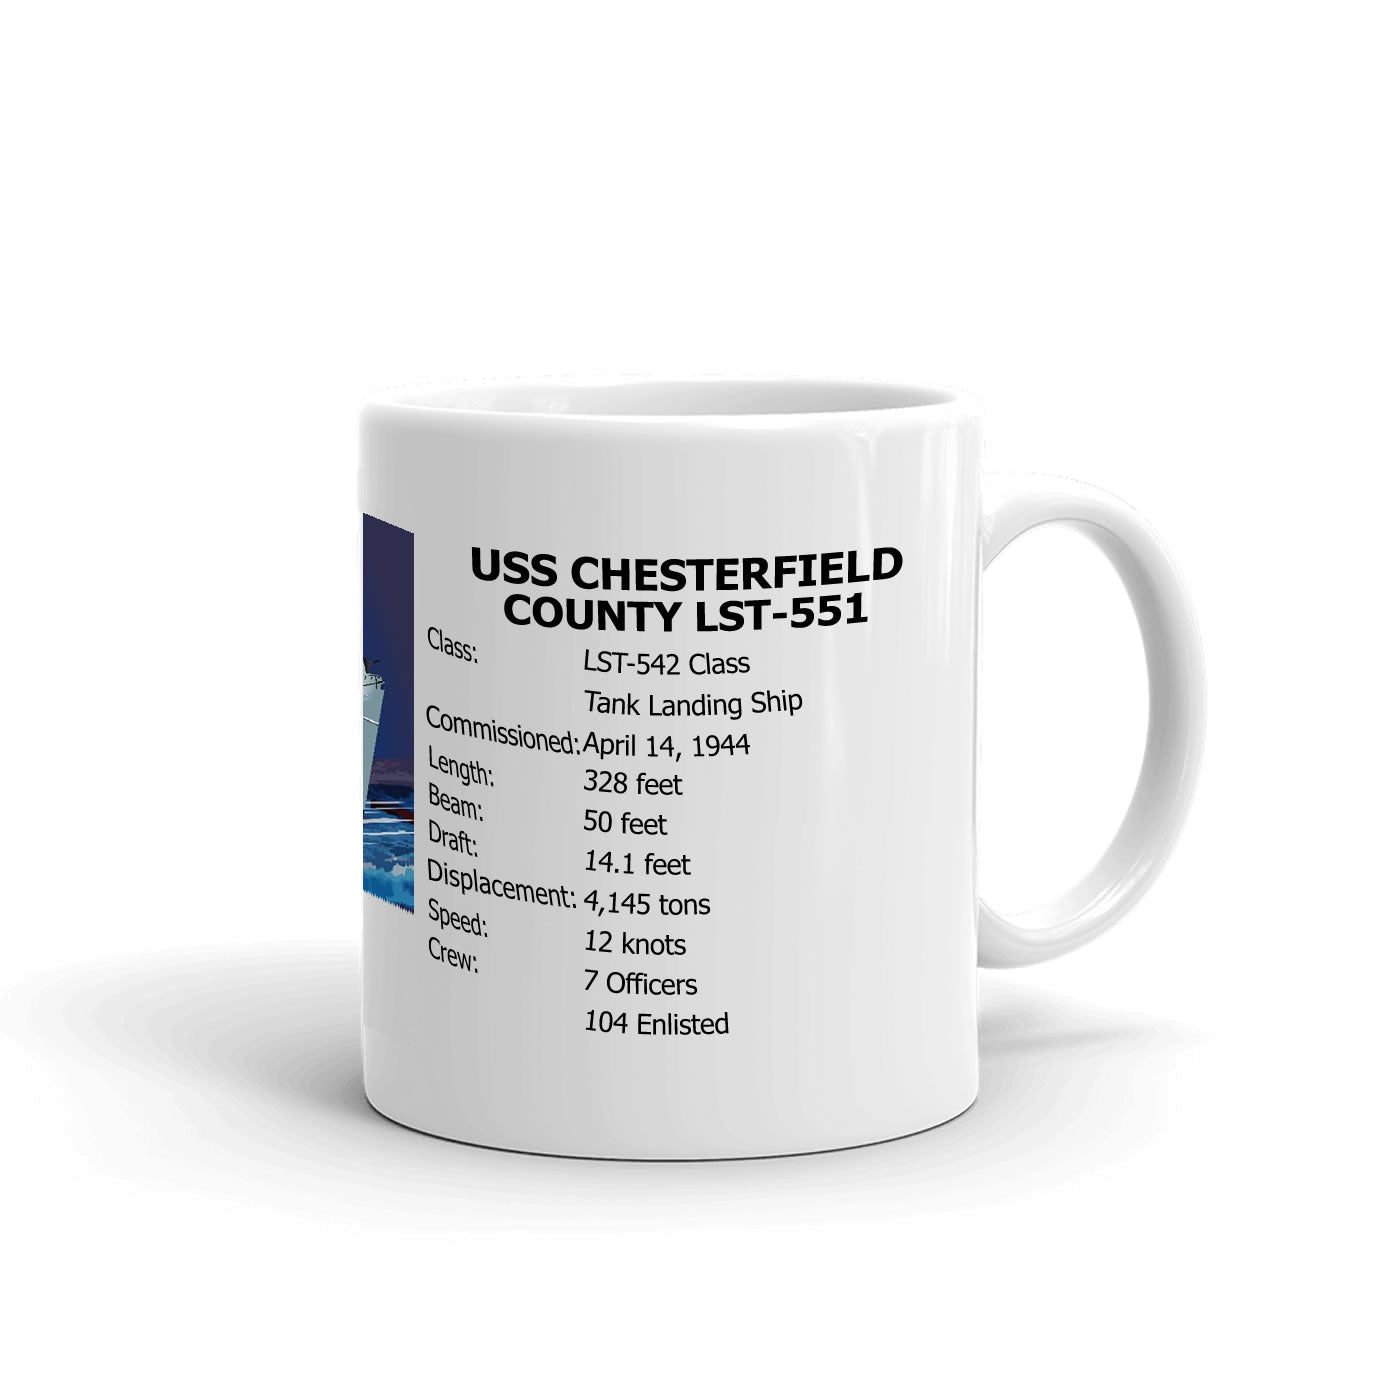 USS Chesterfield County LST-551 Coffee Cup Mug Right Handle